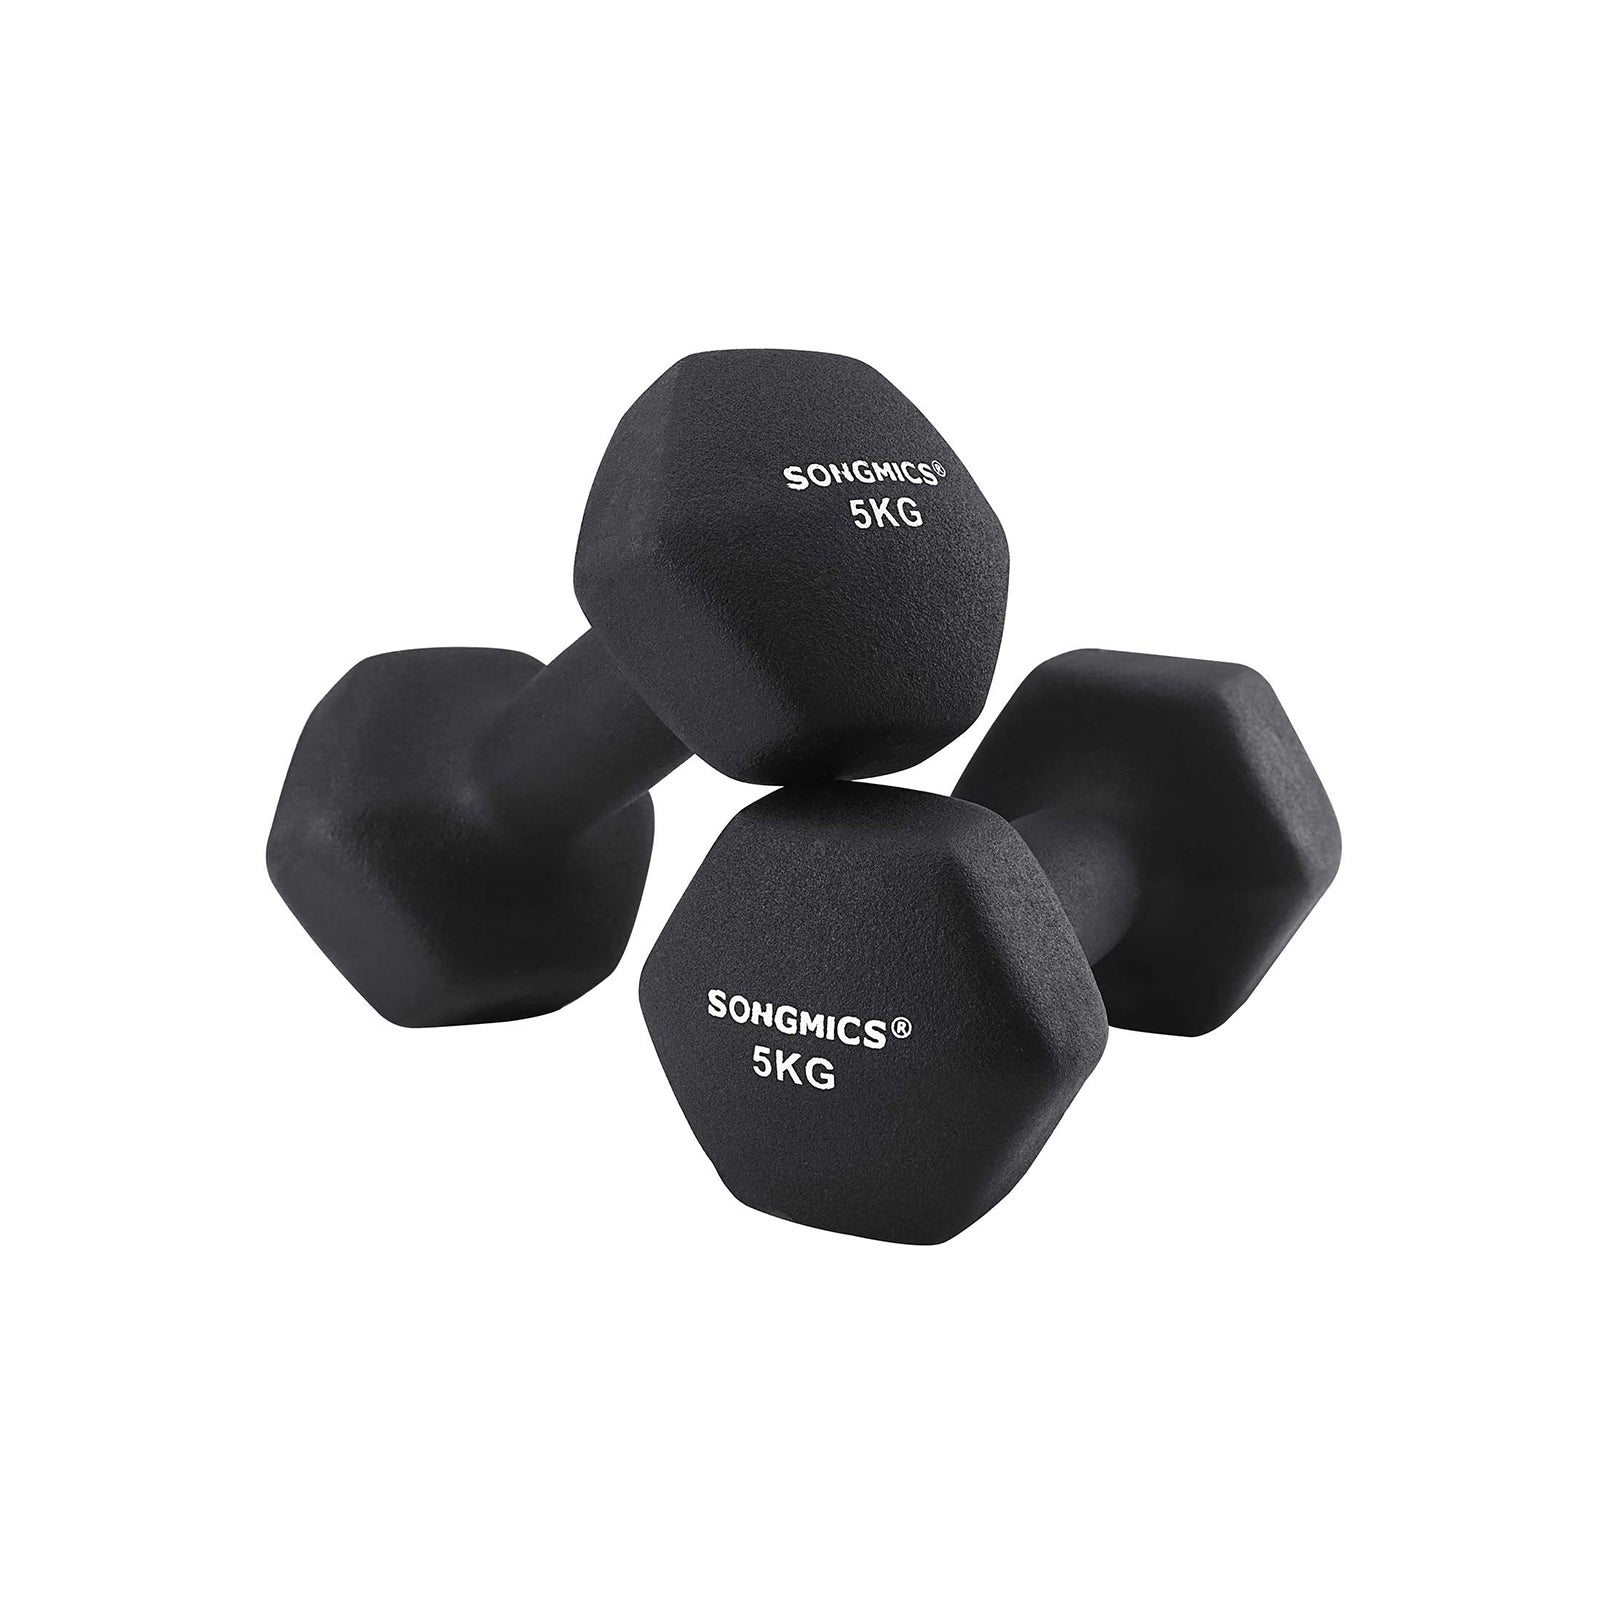 Image of Songmics - Set of 2 Dumbbells Weights Vinyl Coating Gym and Home Workouts Waterproof and Non-Slip with Matte Finish 2 x 5 kg SYL60BK